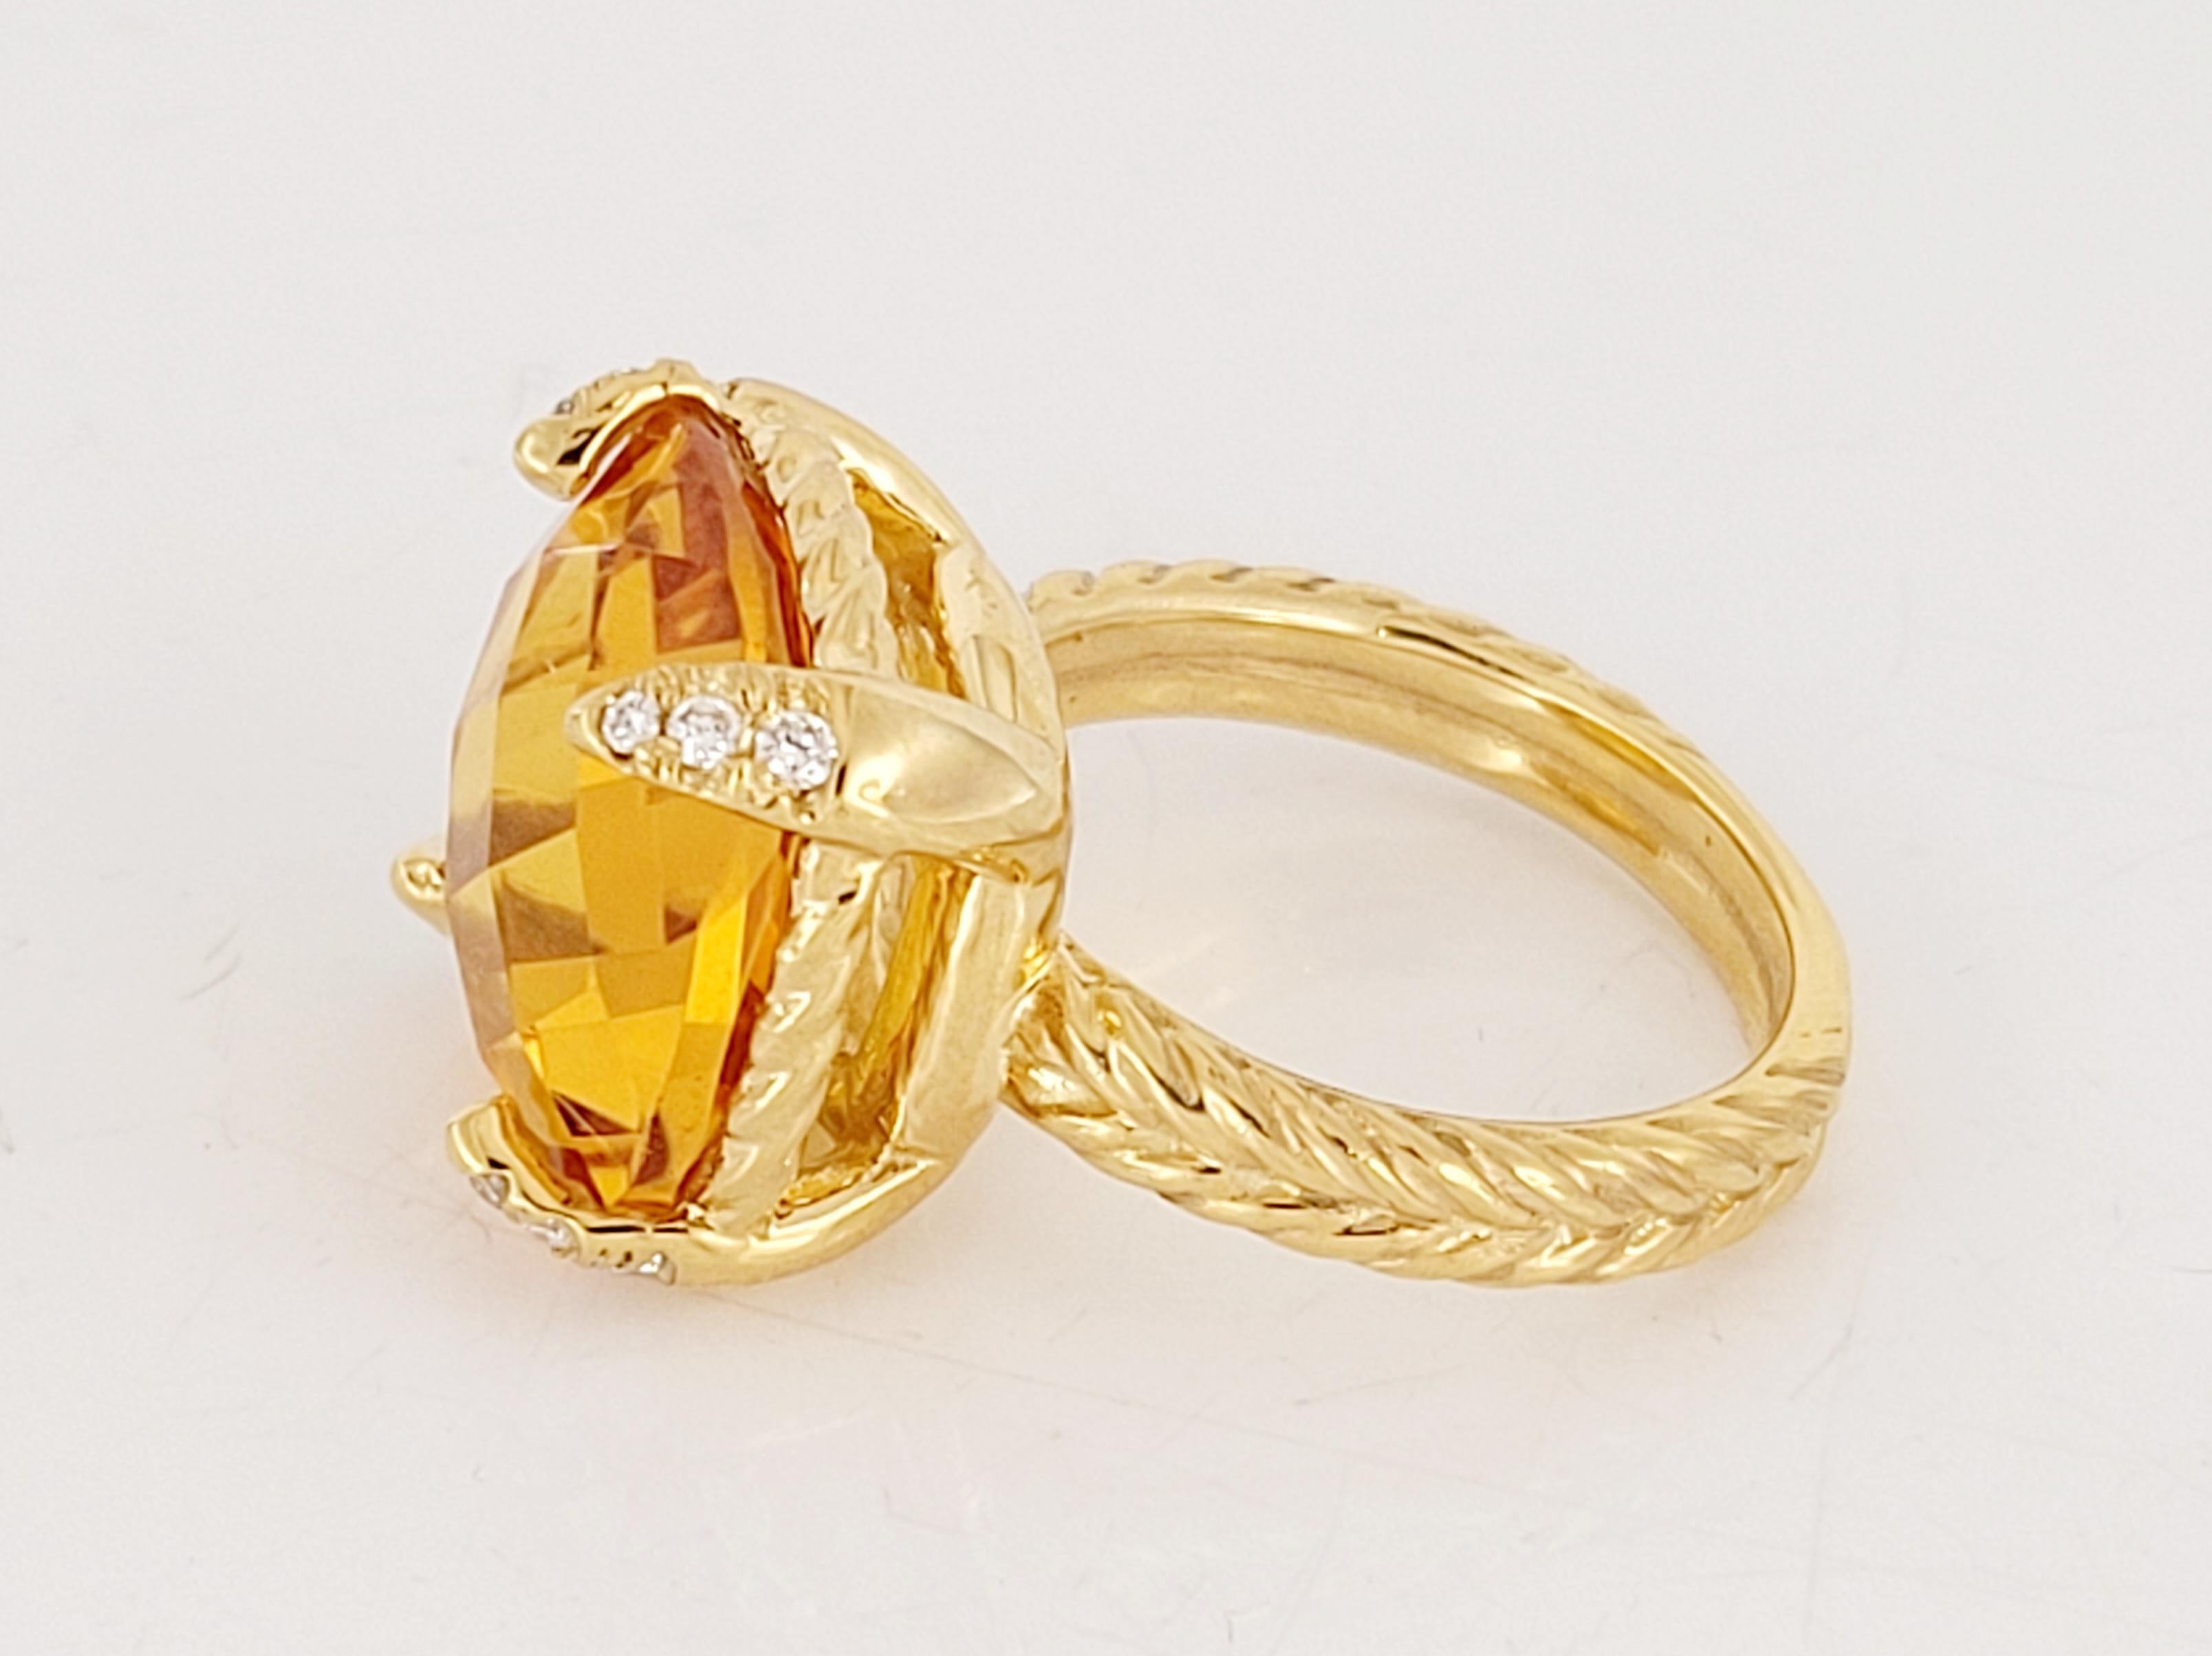 18-karat yellow gold
Citrine, 9.30 total carat weight
Pave-set diamonds, 0.09 total carat weight
Ring, 14mm
Ring Size 6
Condition New, never worn
Comes with David Yurman Ring Box
Retail Price $2,825